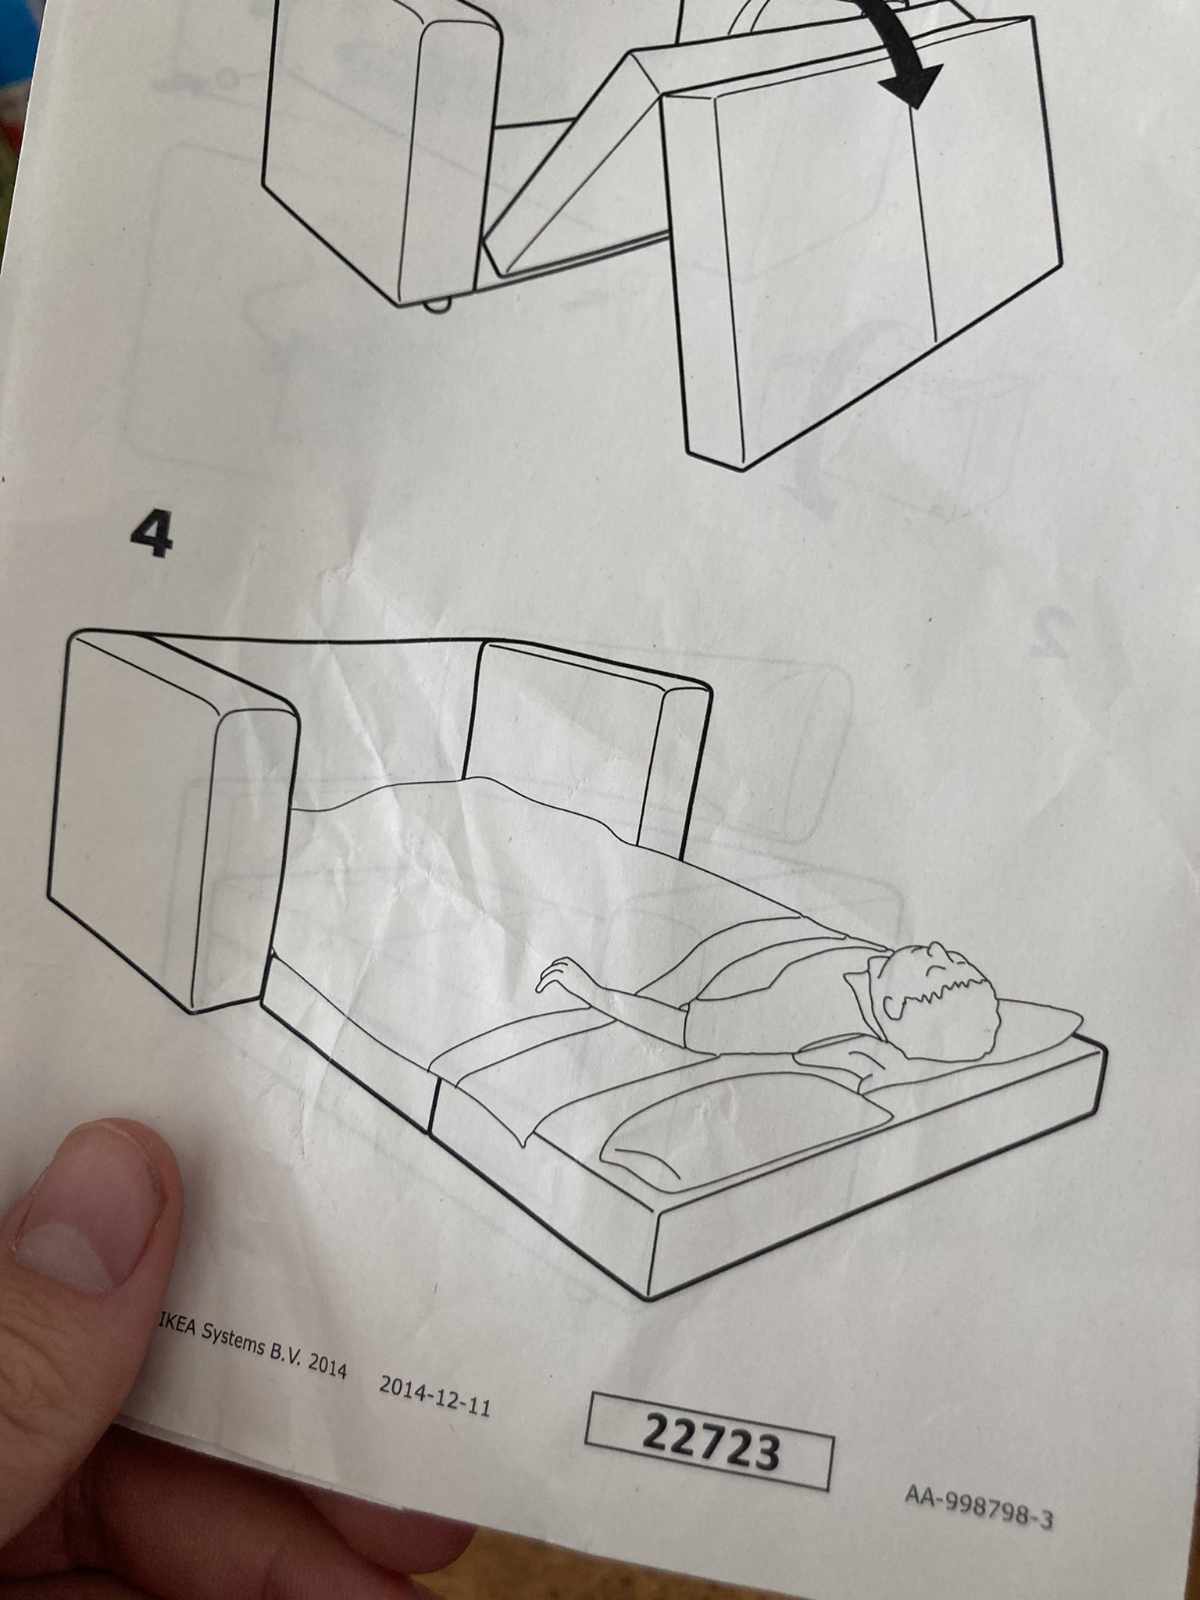 Apparently I've been using IKEA's hide-a-bed wrong...